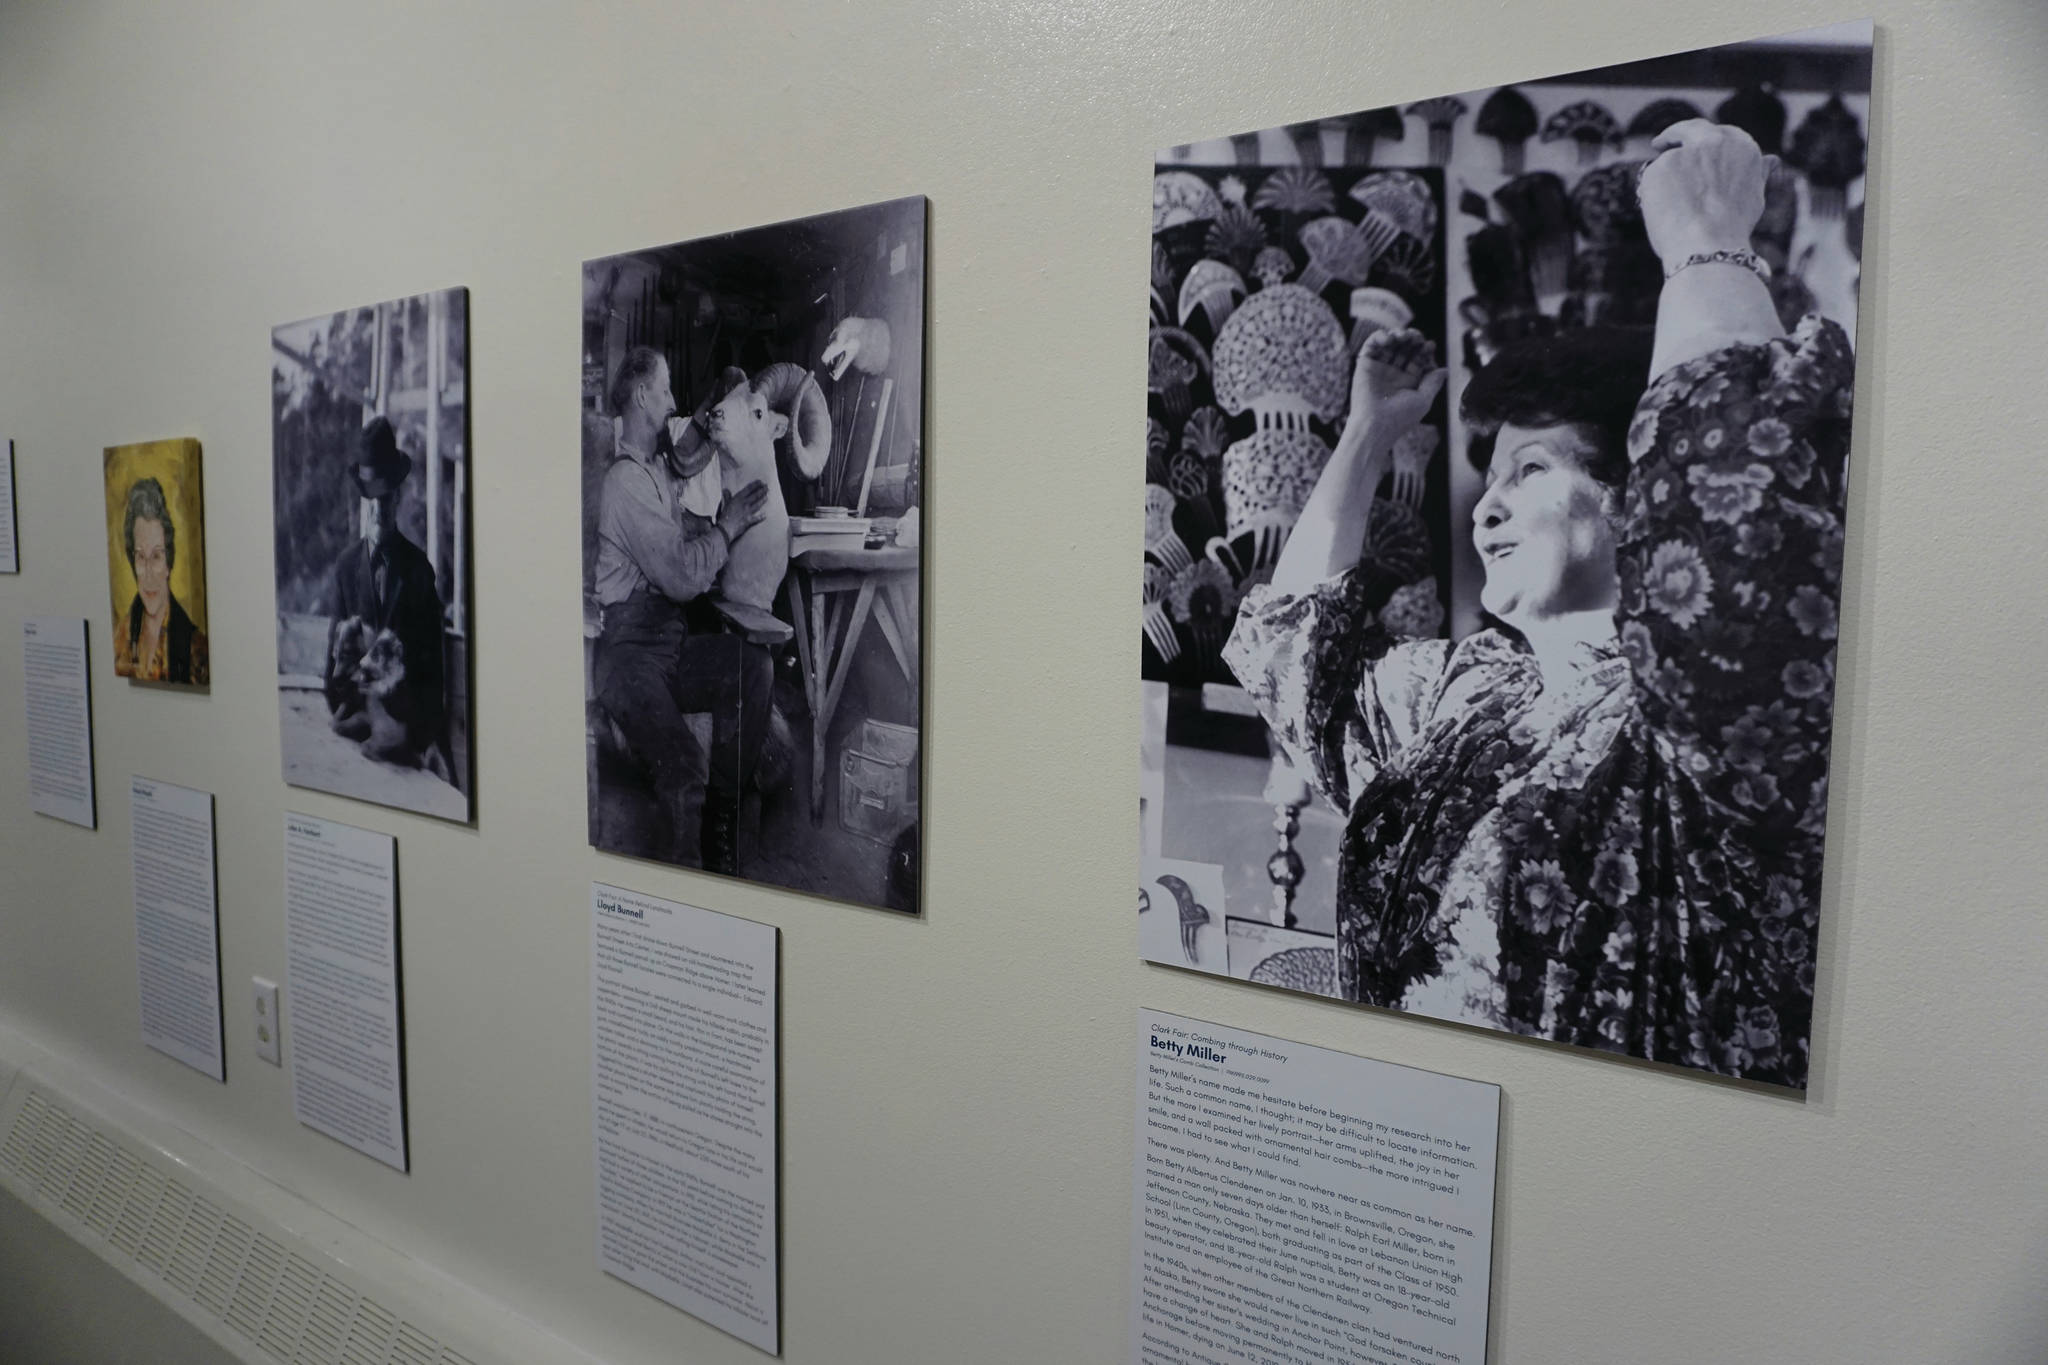 Clark Fair wrote stories to go alone with portraits in “Familiar Faces: Portrait of a Community,” on exhibit through May 2021 at the Pratt Museum in Homer, Alaska. (Photo by Michael Armstrong/Homer News)